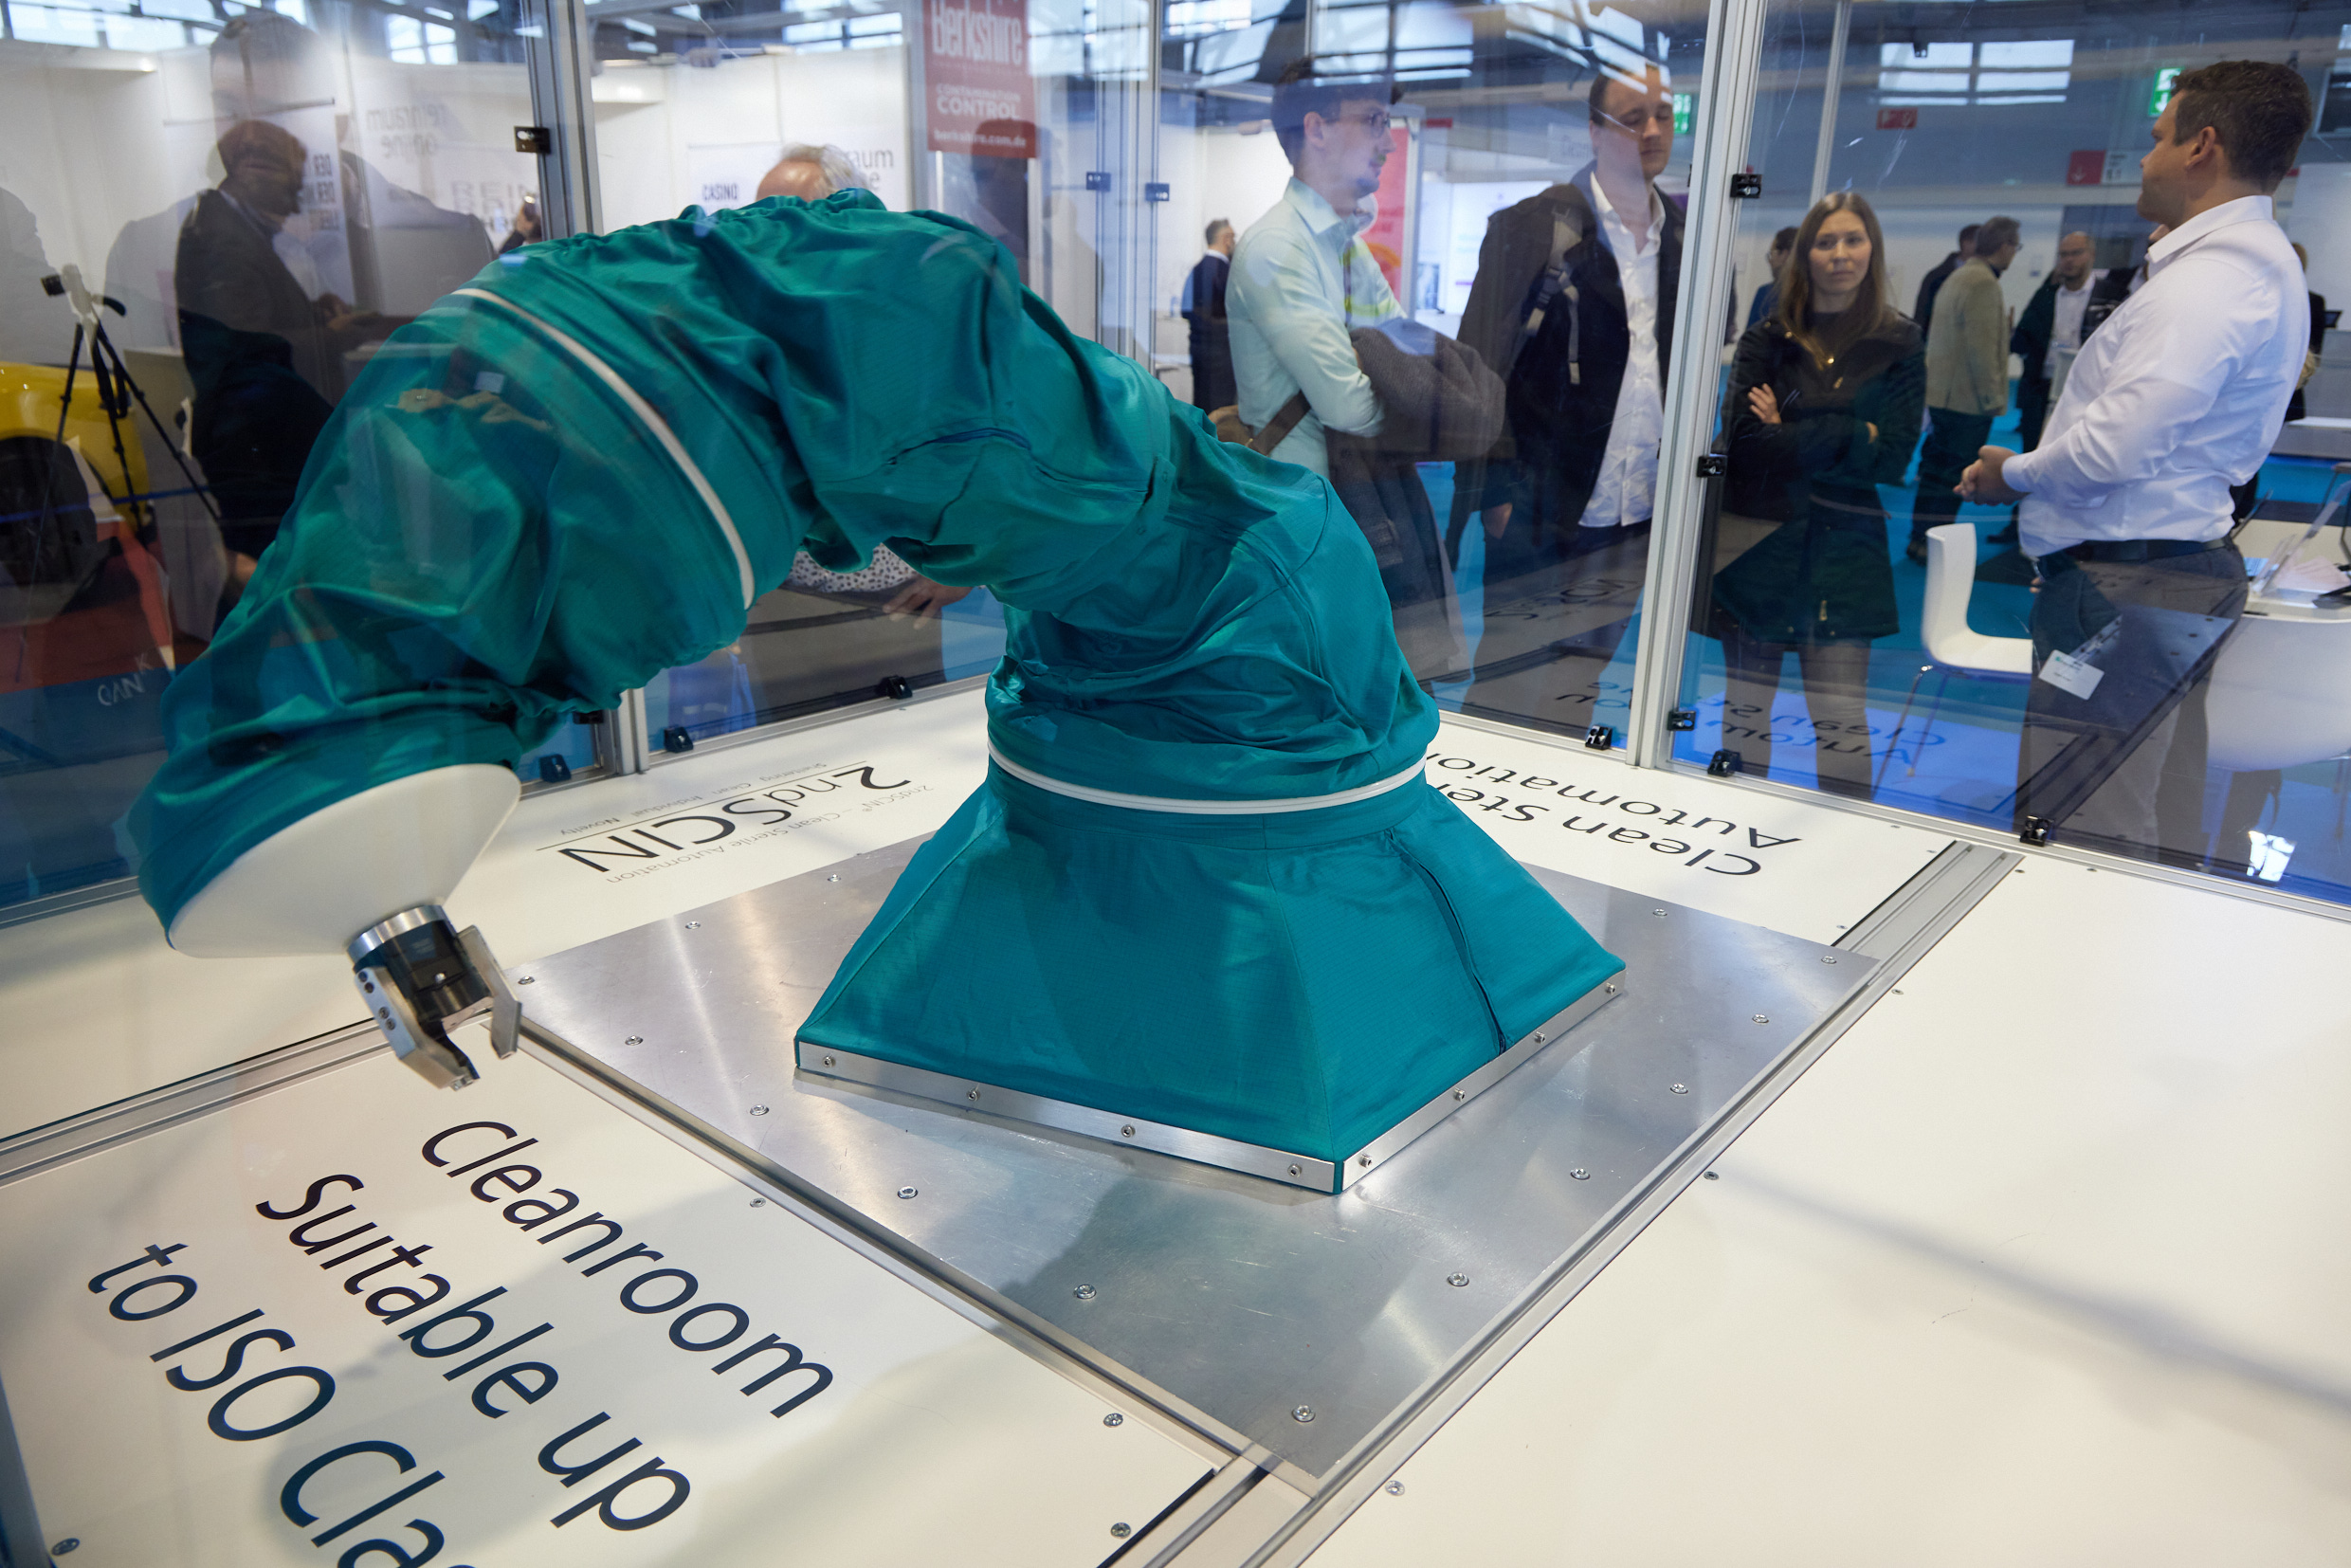 Cleanzone showcases technical innovations - also an important topic in the cleanroom.